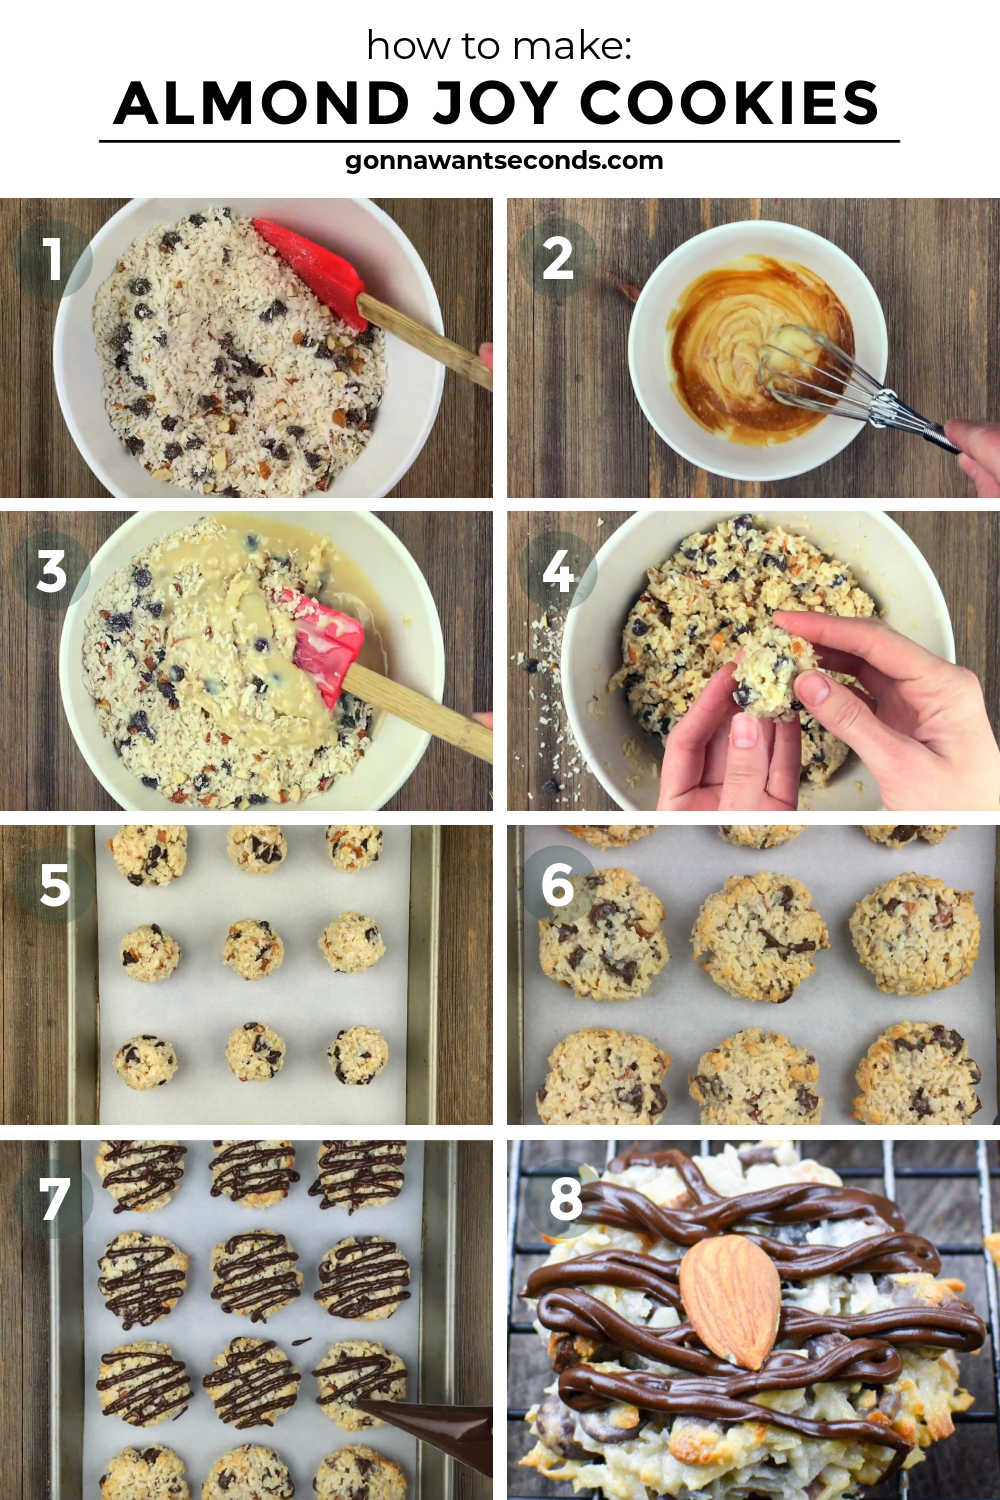 Step by step how to make almond joy cookies